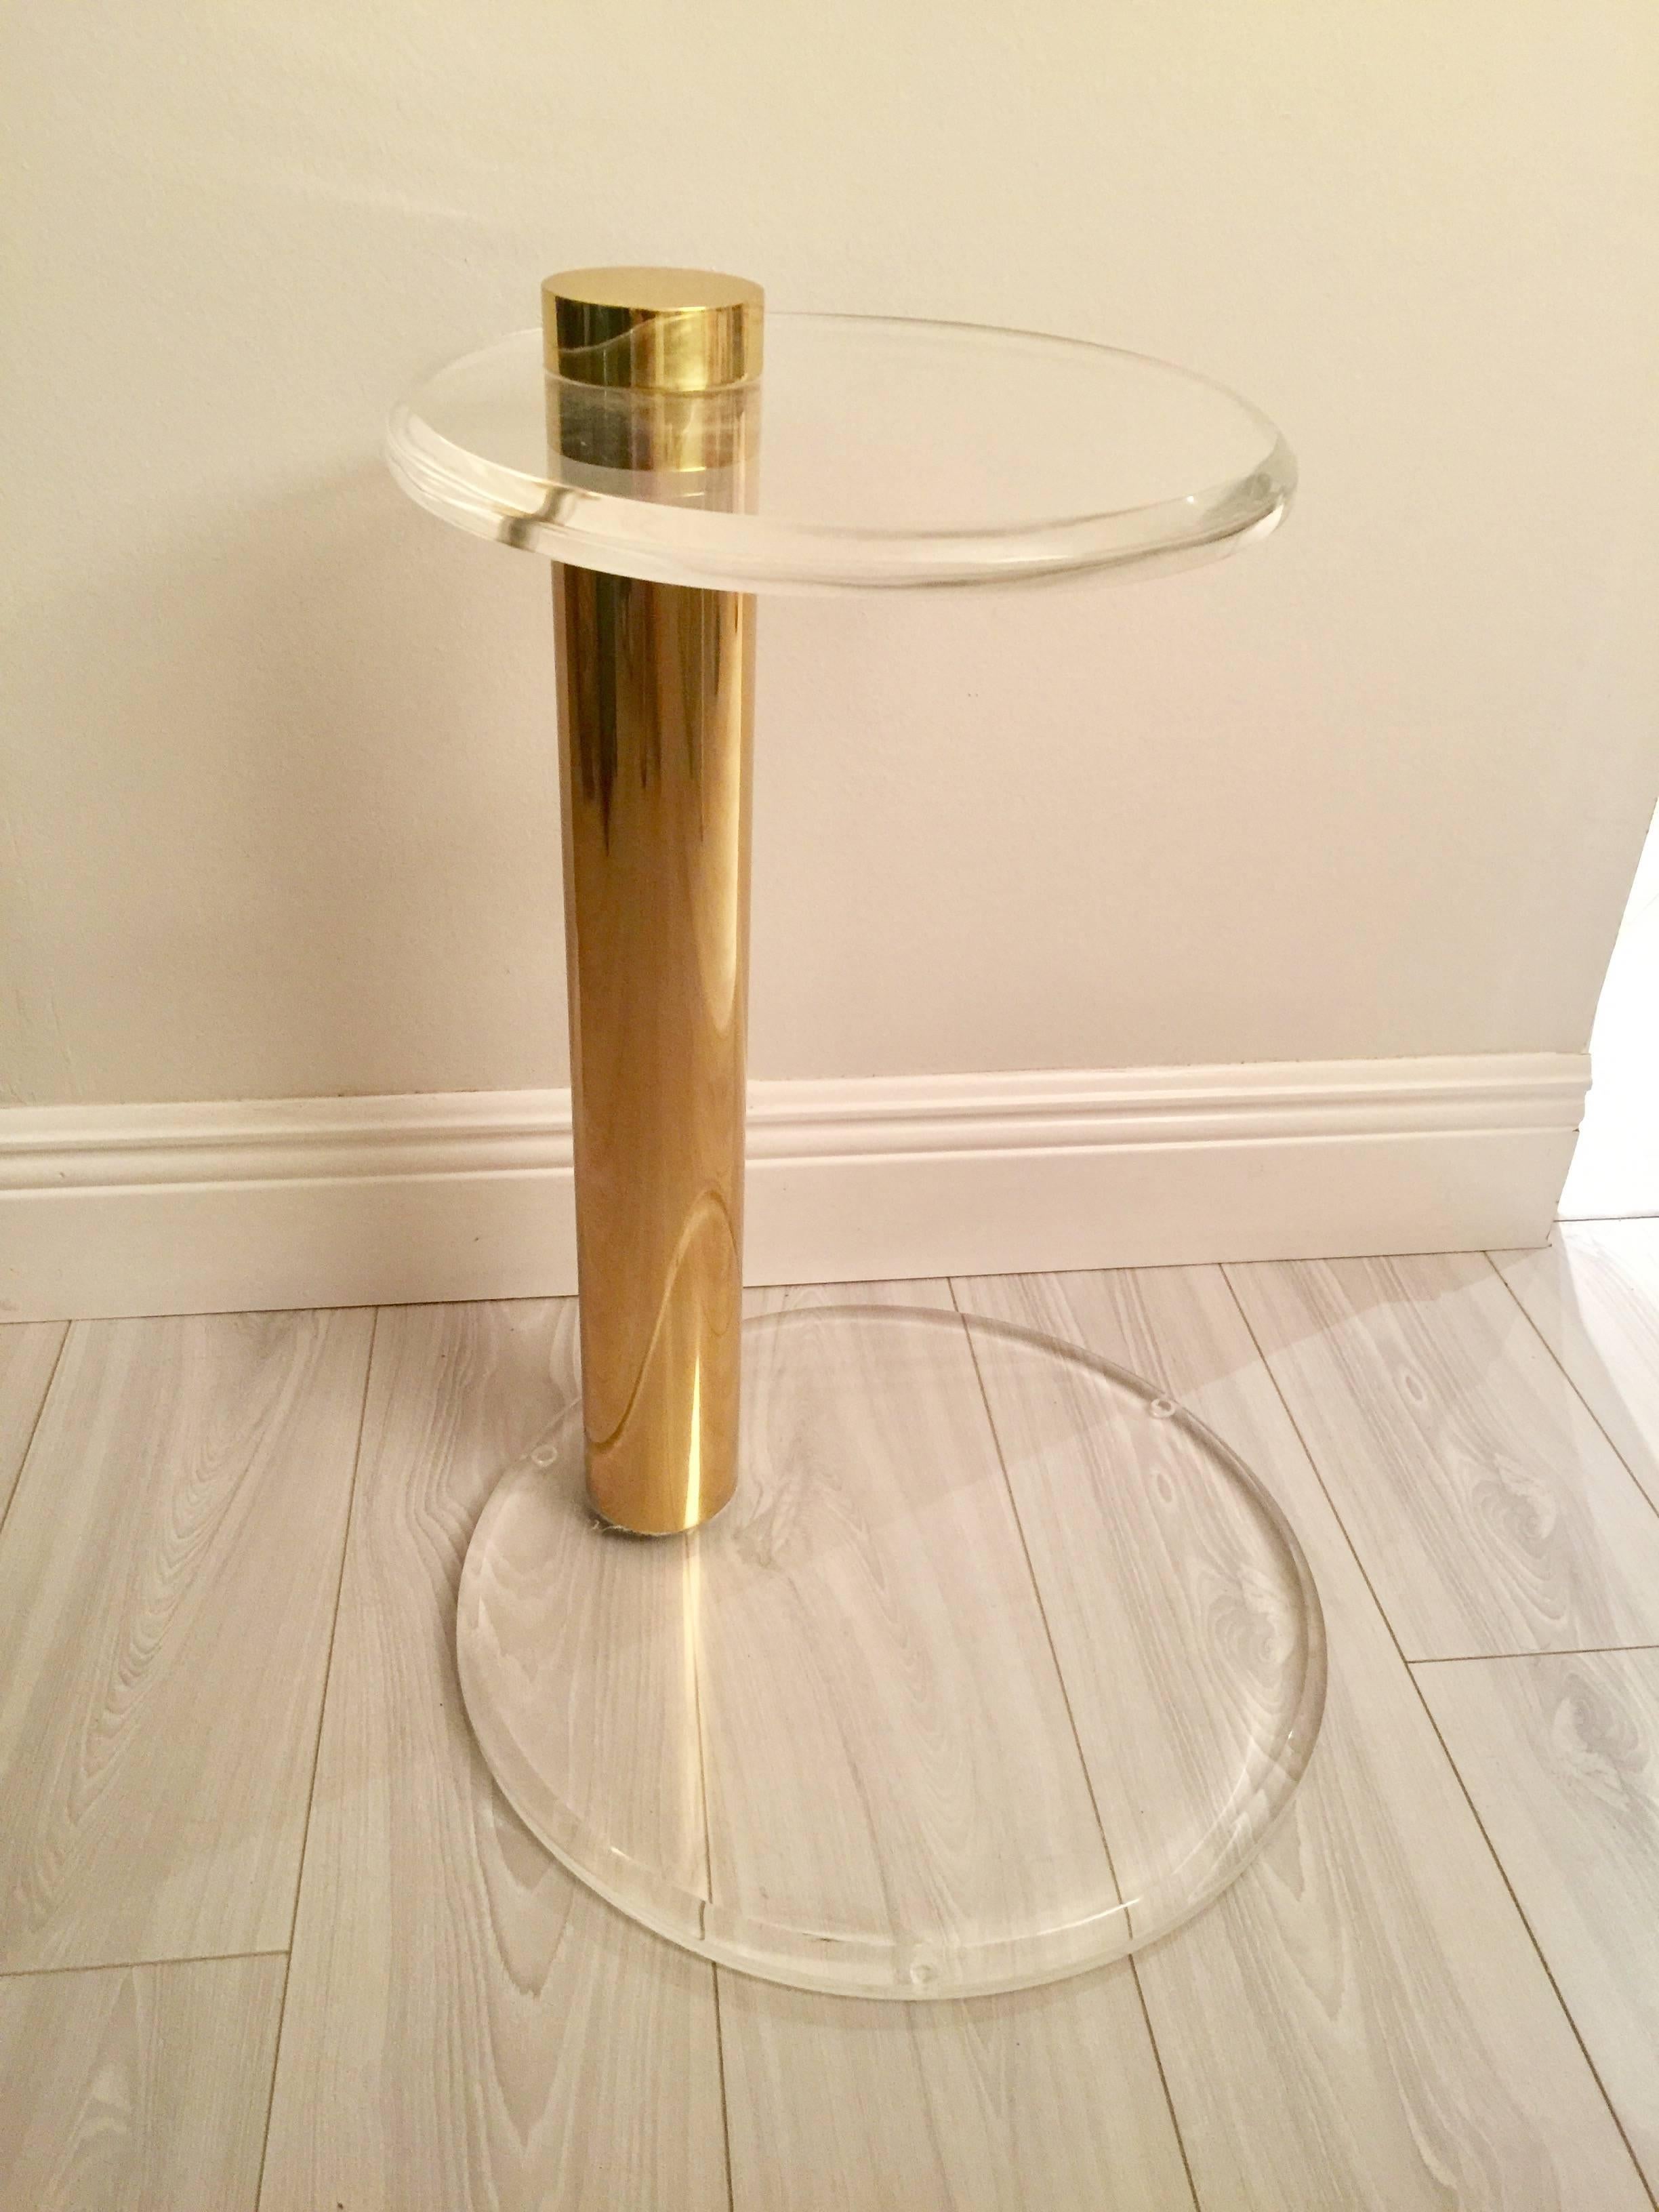 A simple elegant drinks/occasional table of Lucite and brass.
Clean simple elegant design in the style of Karl Springer.
Great combination of materials and beautifully scaled.
Measure: Base is 12